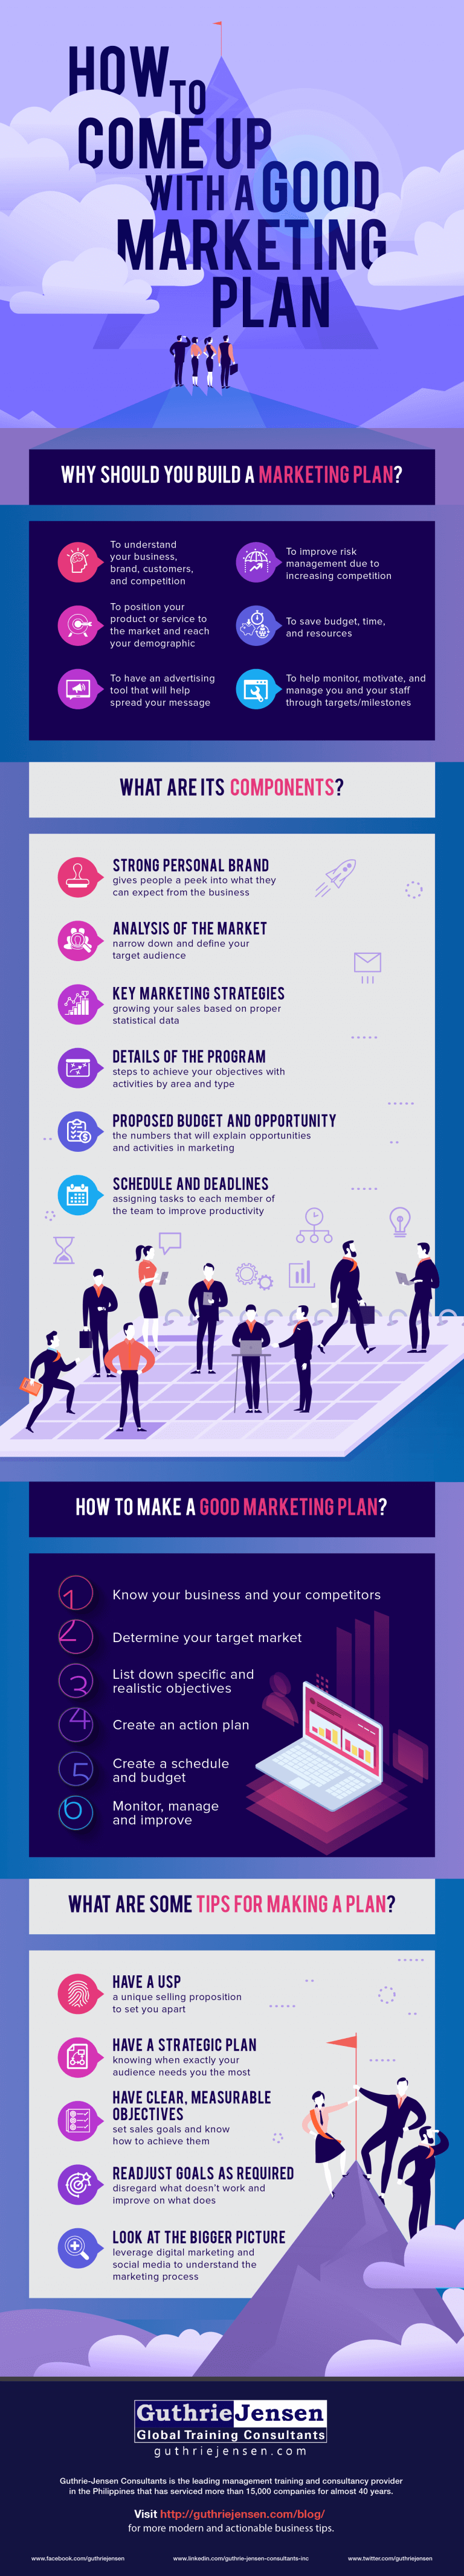 How-to-Come-Up-With-A-Good-Marketing-Plan